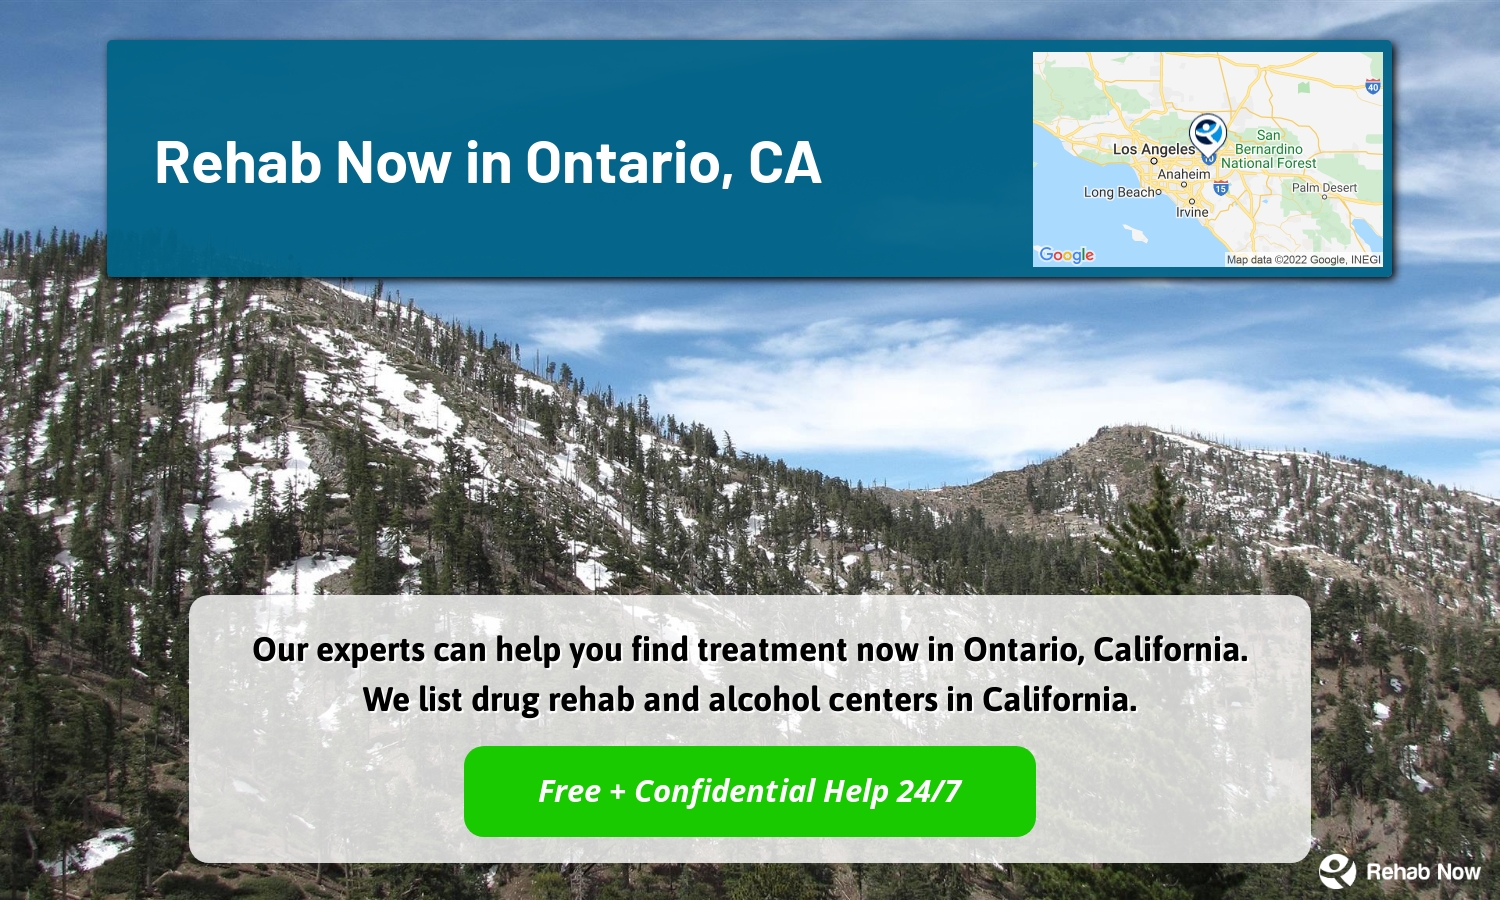 Our experts can help you find treatment now in Ontario, California. We list drug rehab and alcohol centers in California.